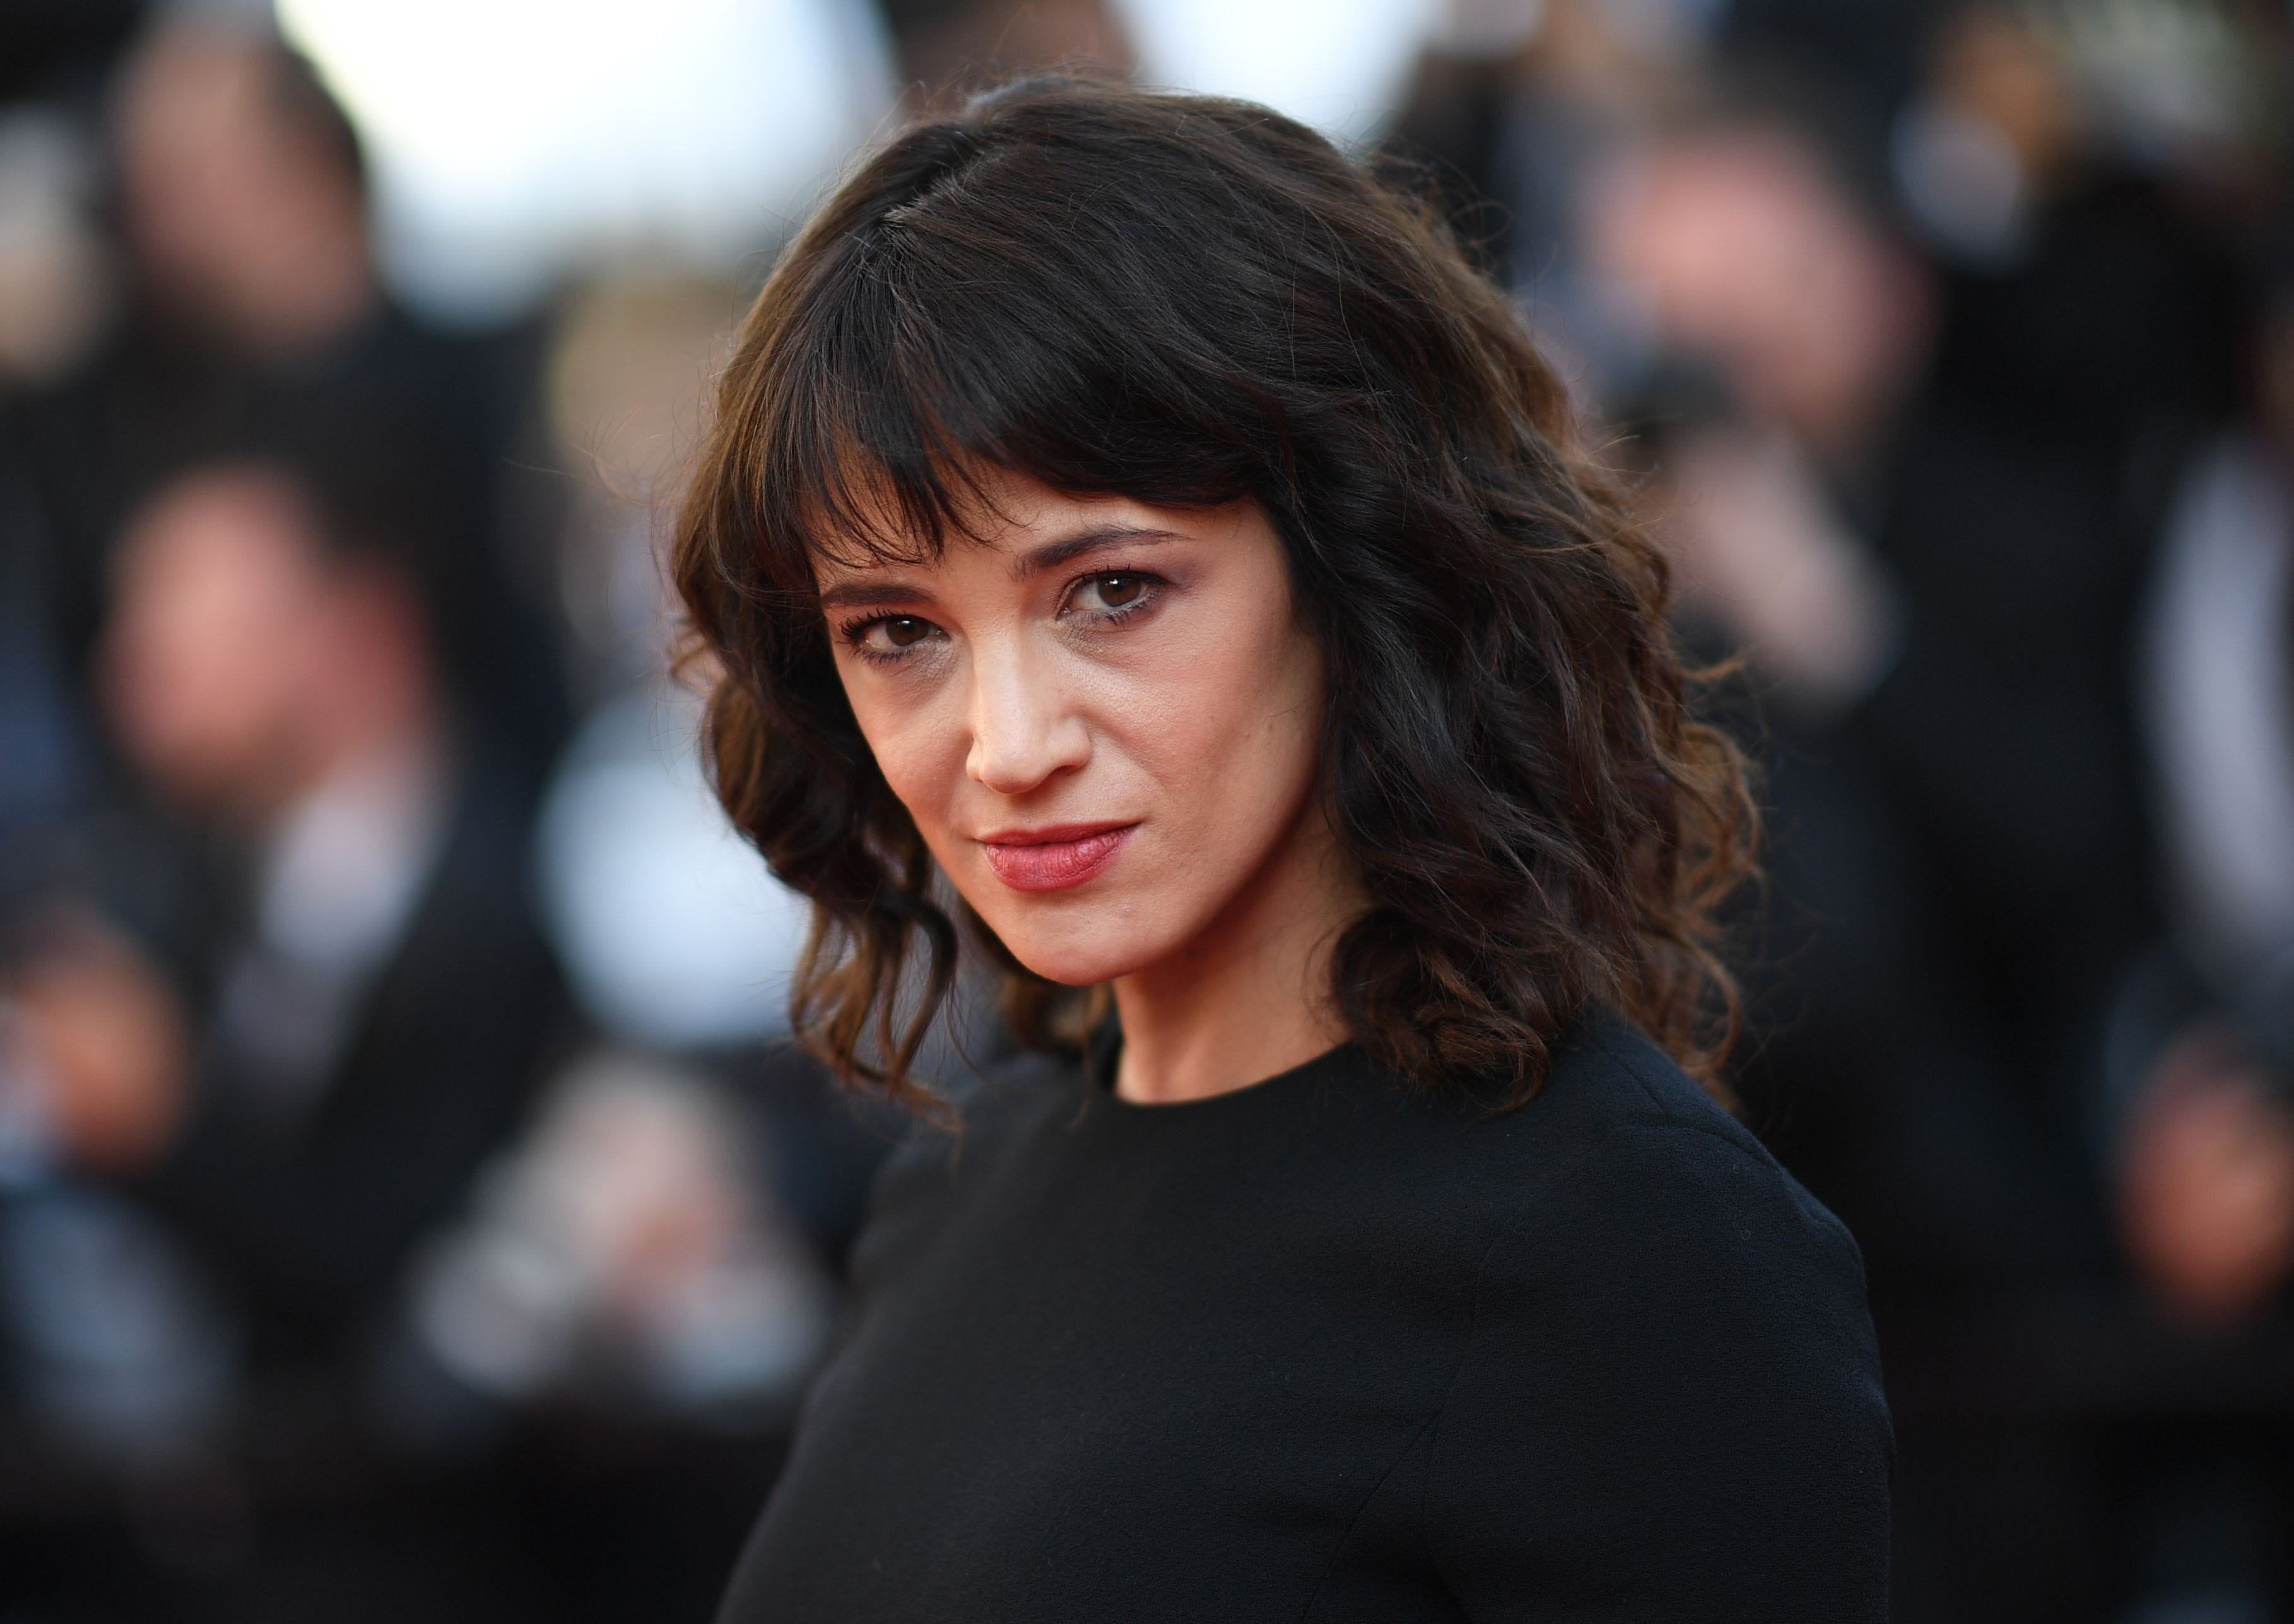 Asia Argento Anthony Bourdain cheated picture